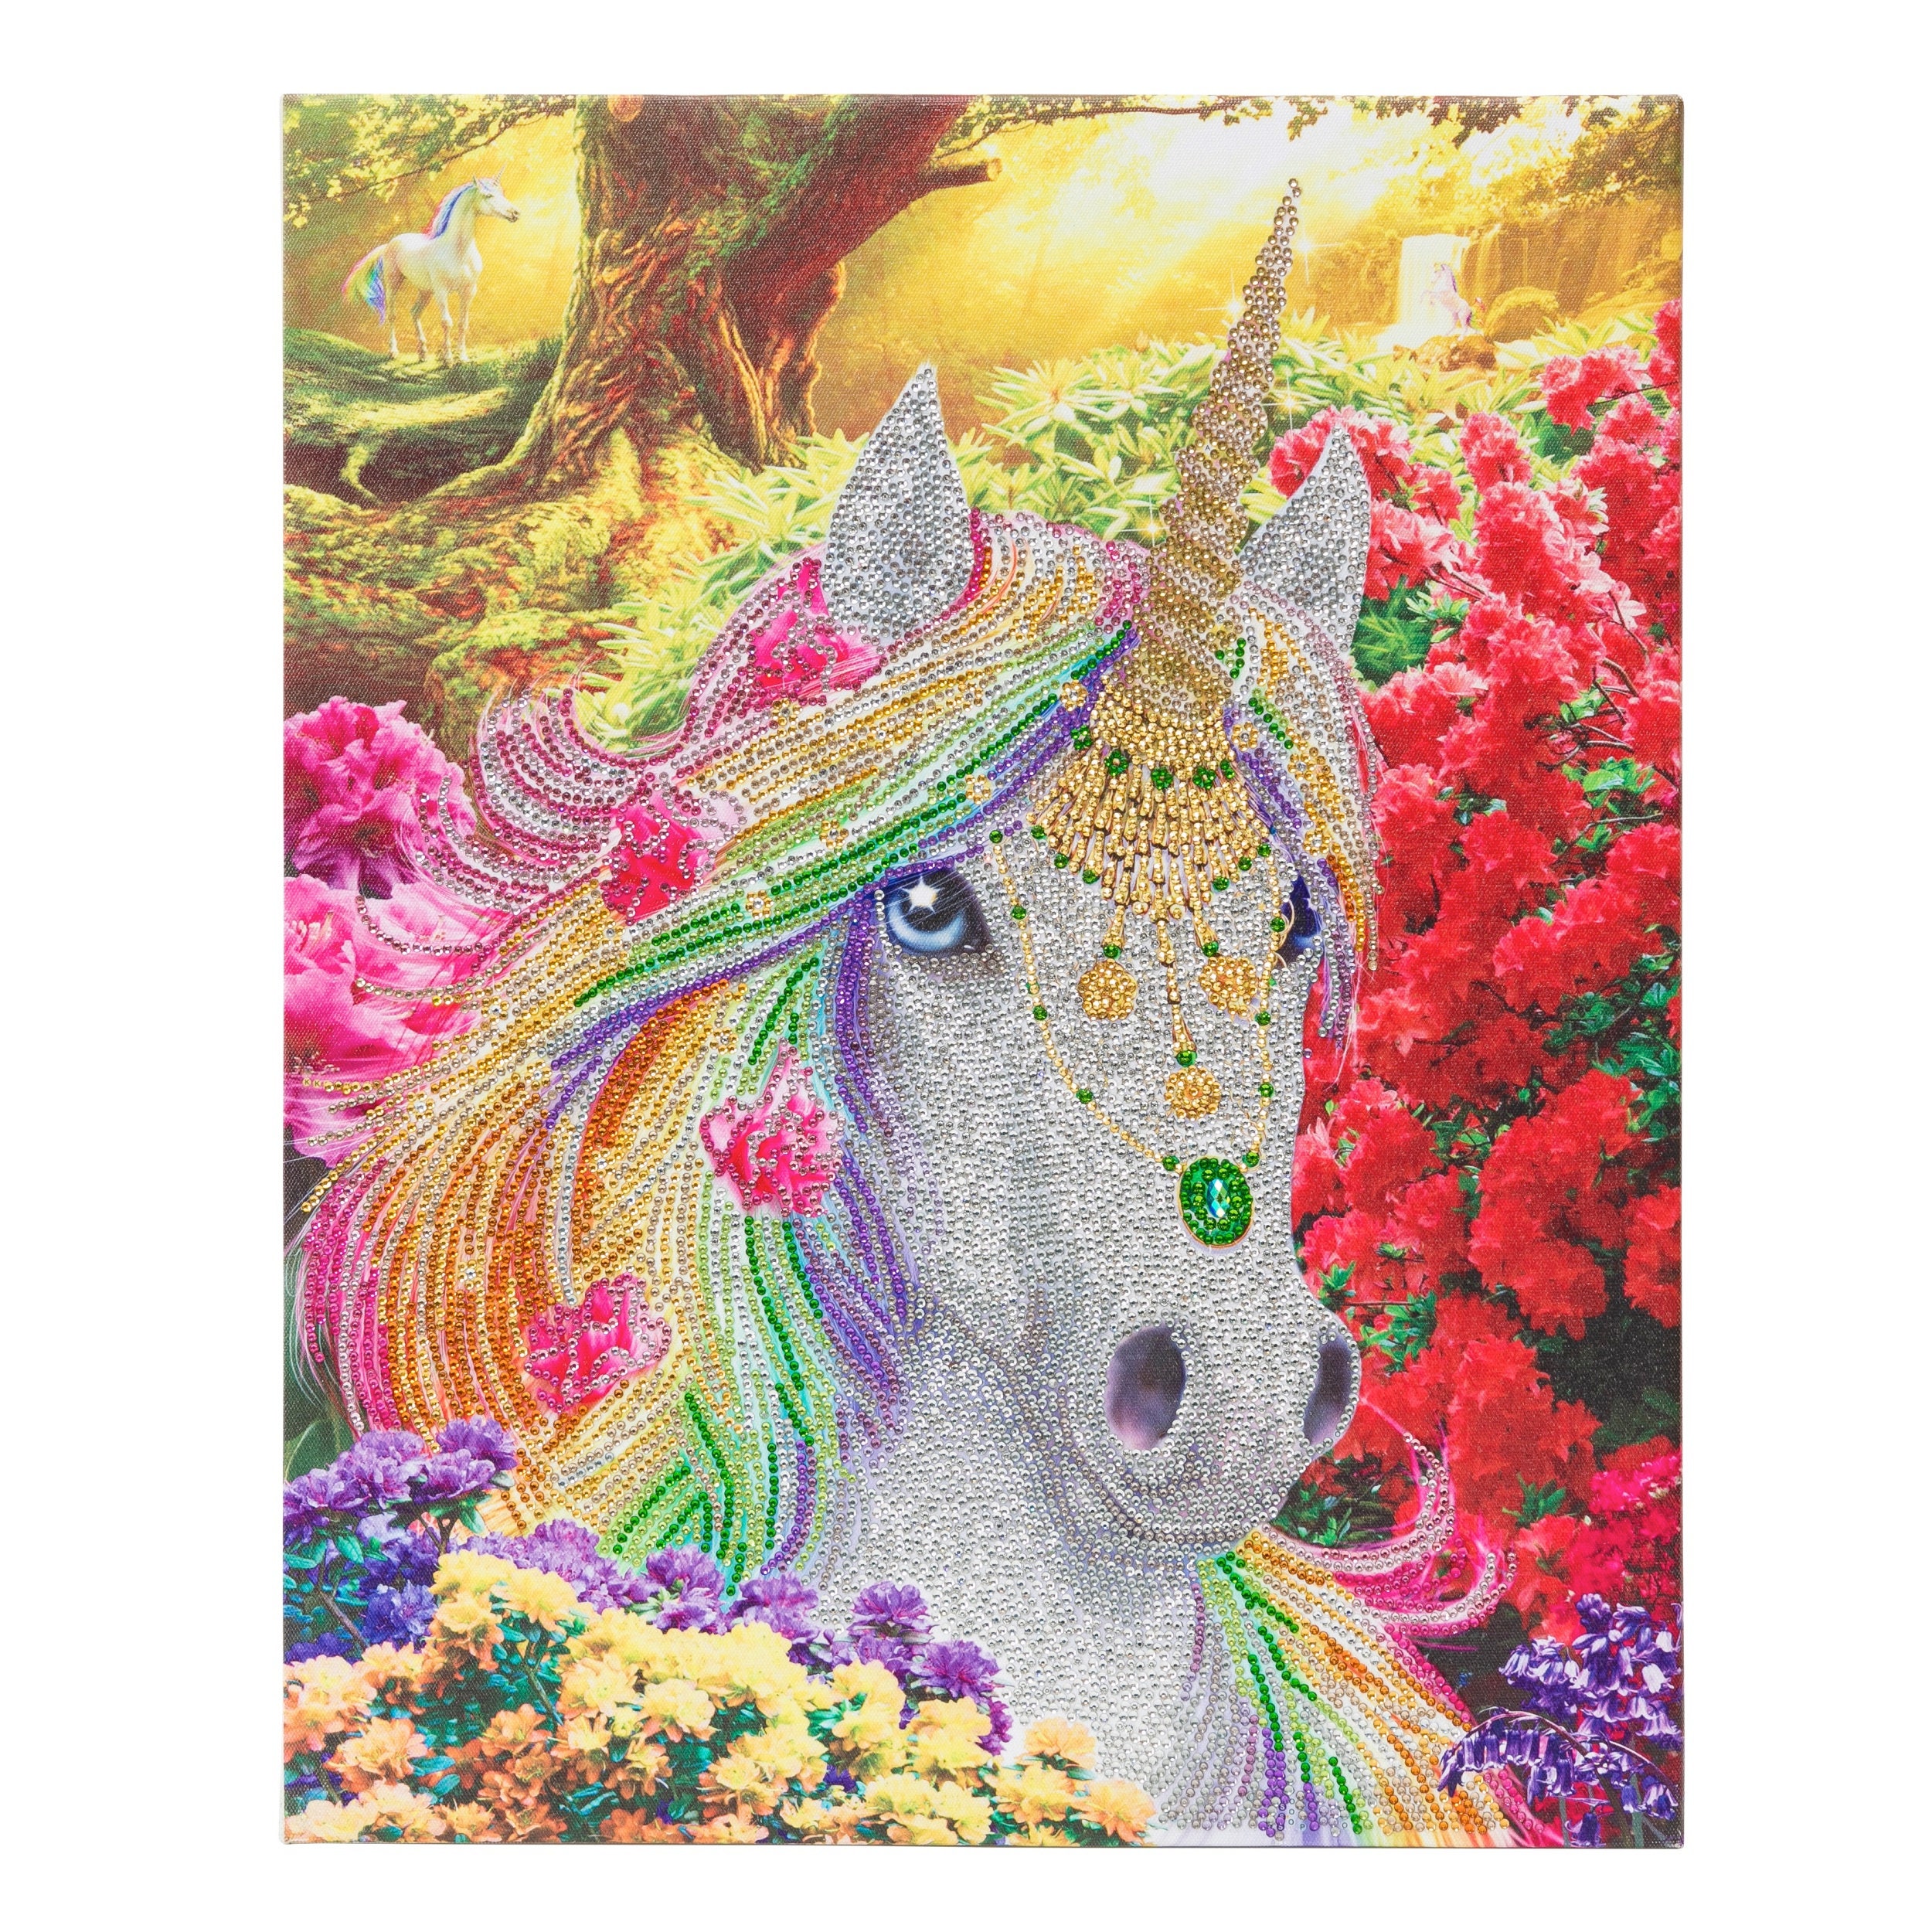 DIAMOND PAINTING KIT Unicorn Forest Crystal Art Fantasy Abstract 20 X 16  Ins With Wooden Frame 